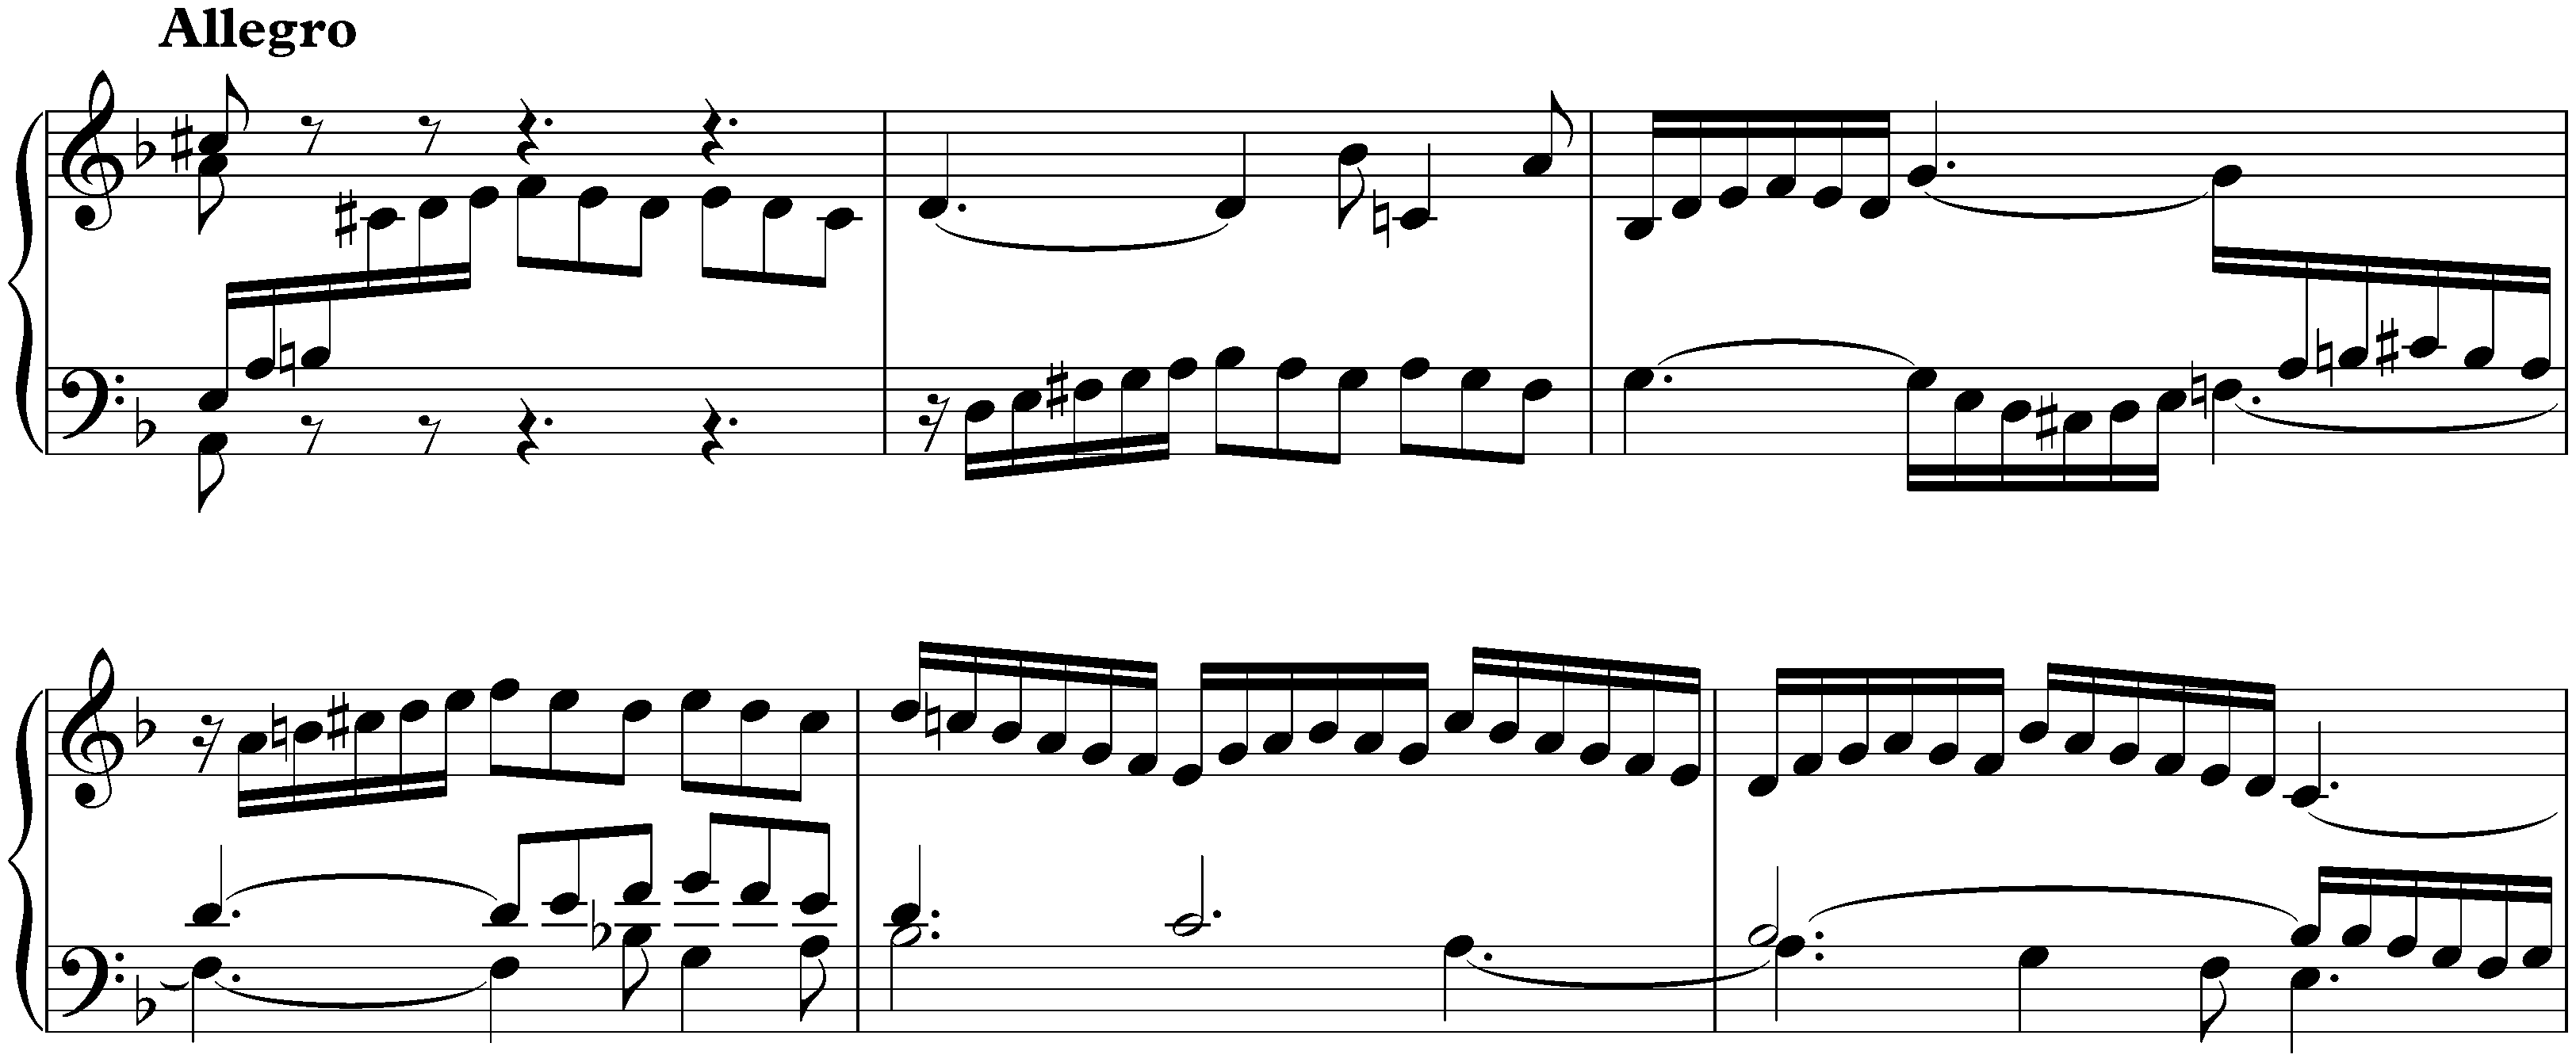 English Suite no. 6 in D minor, BWV 811; 1. Prélude